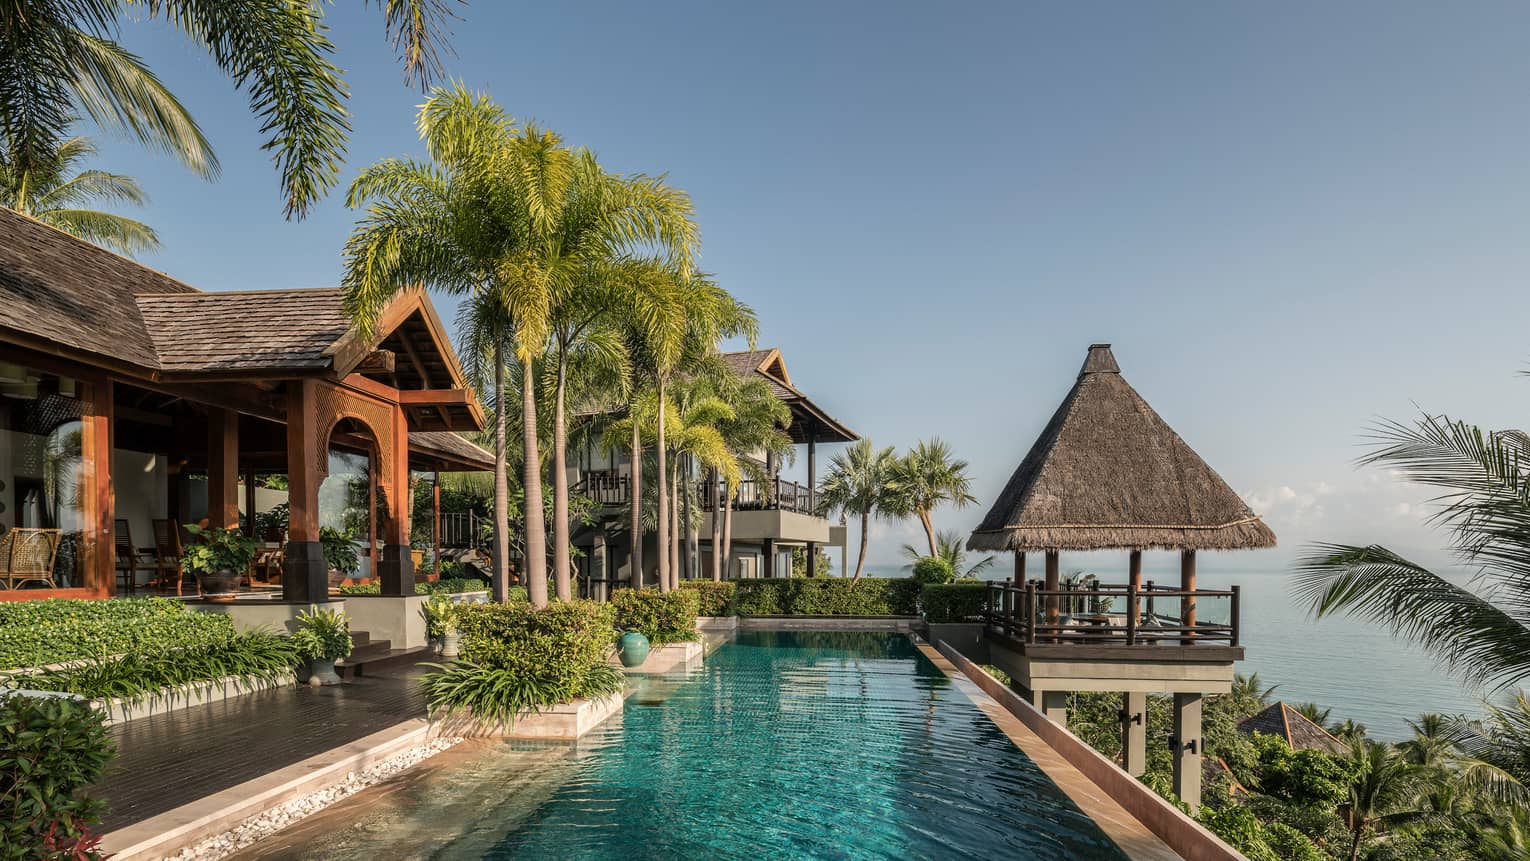 Long outdoor swimming pool under tall palm trees, thatched roof gazebo